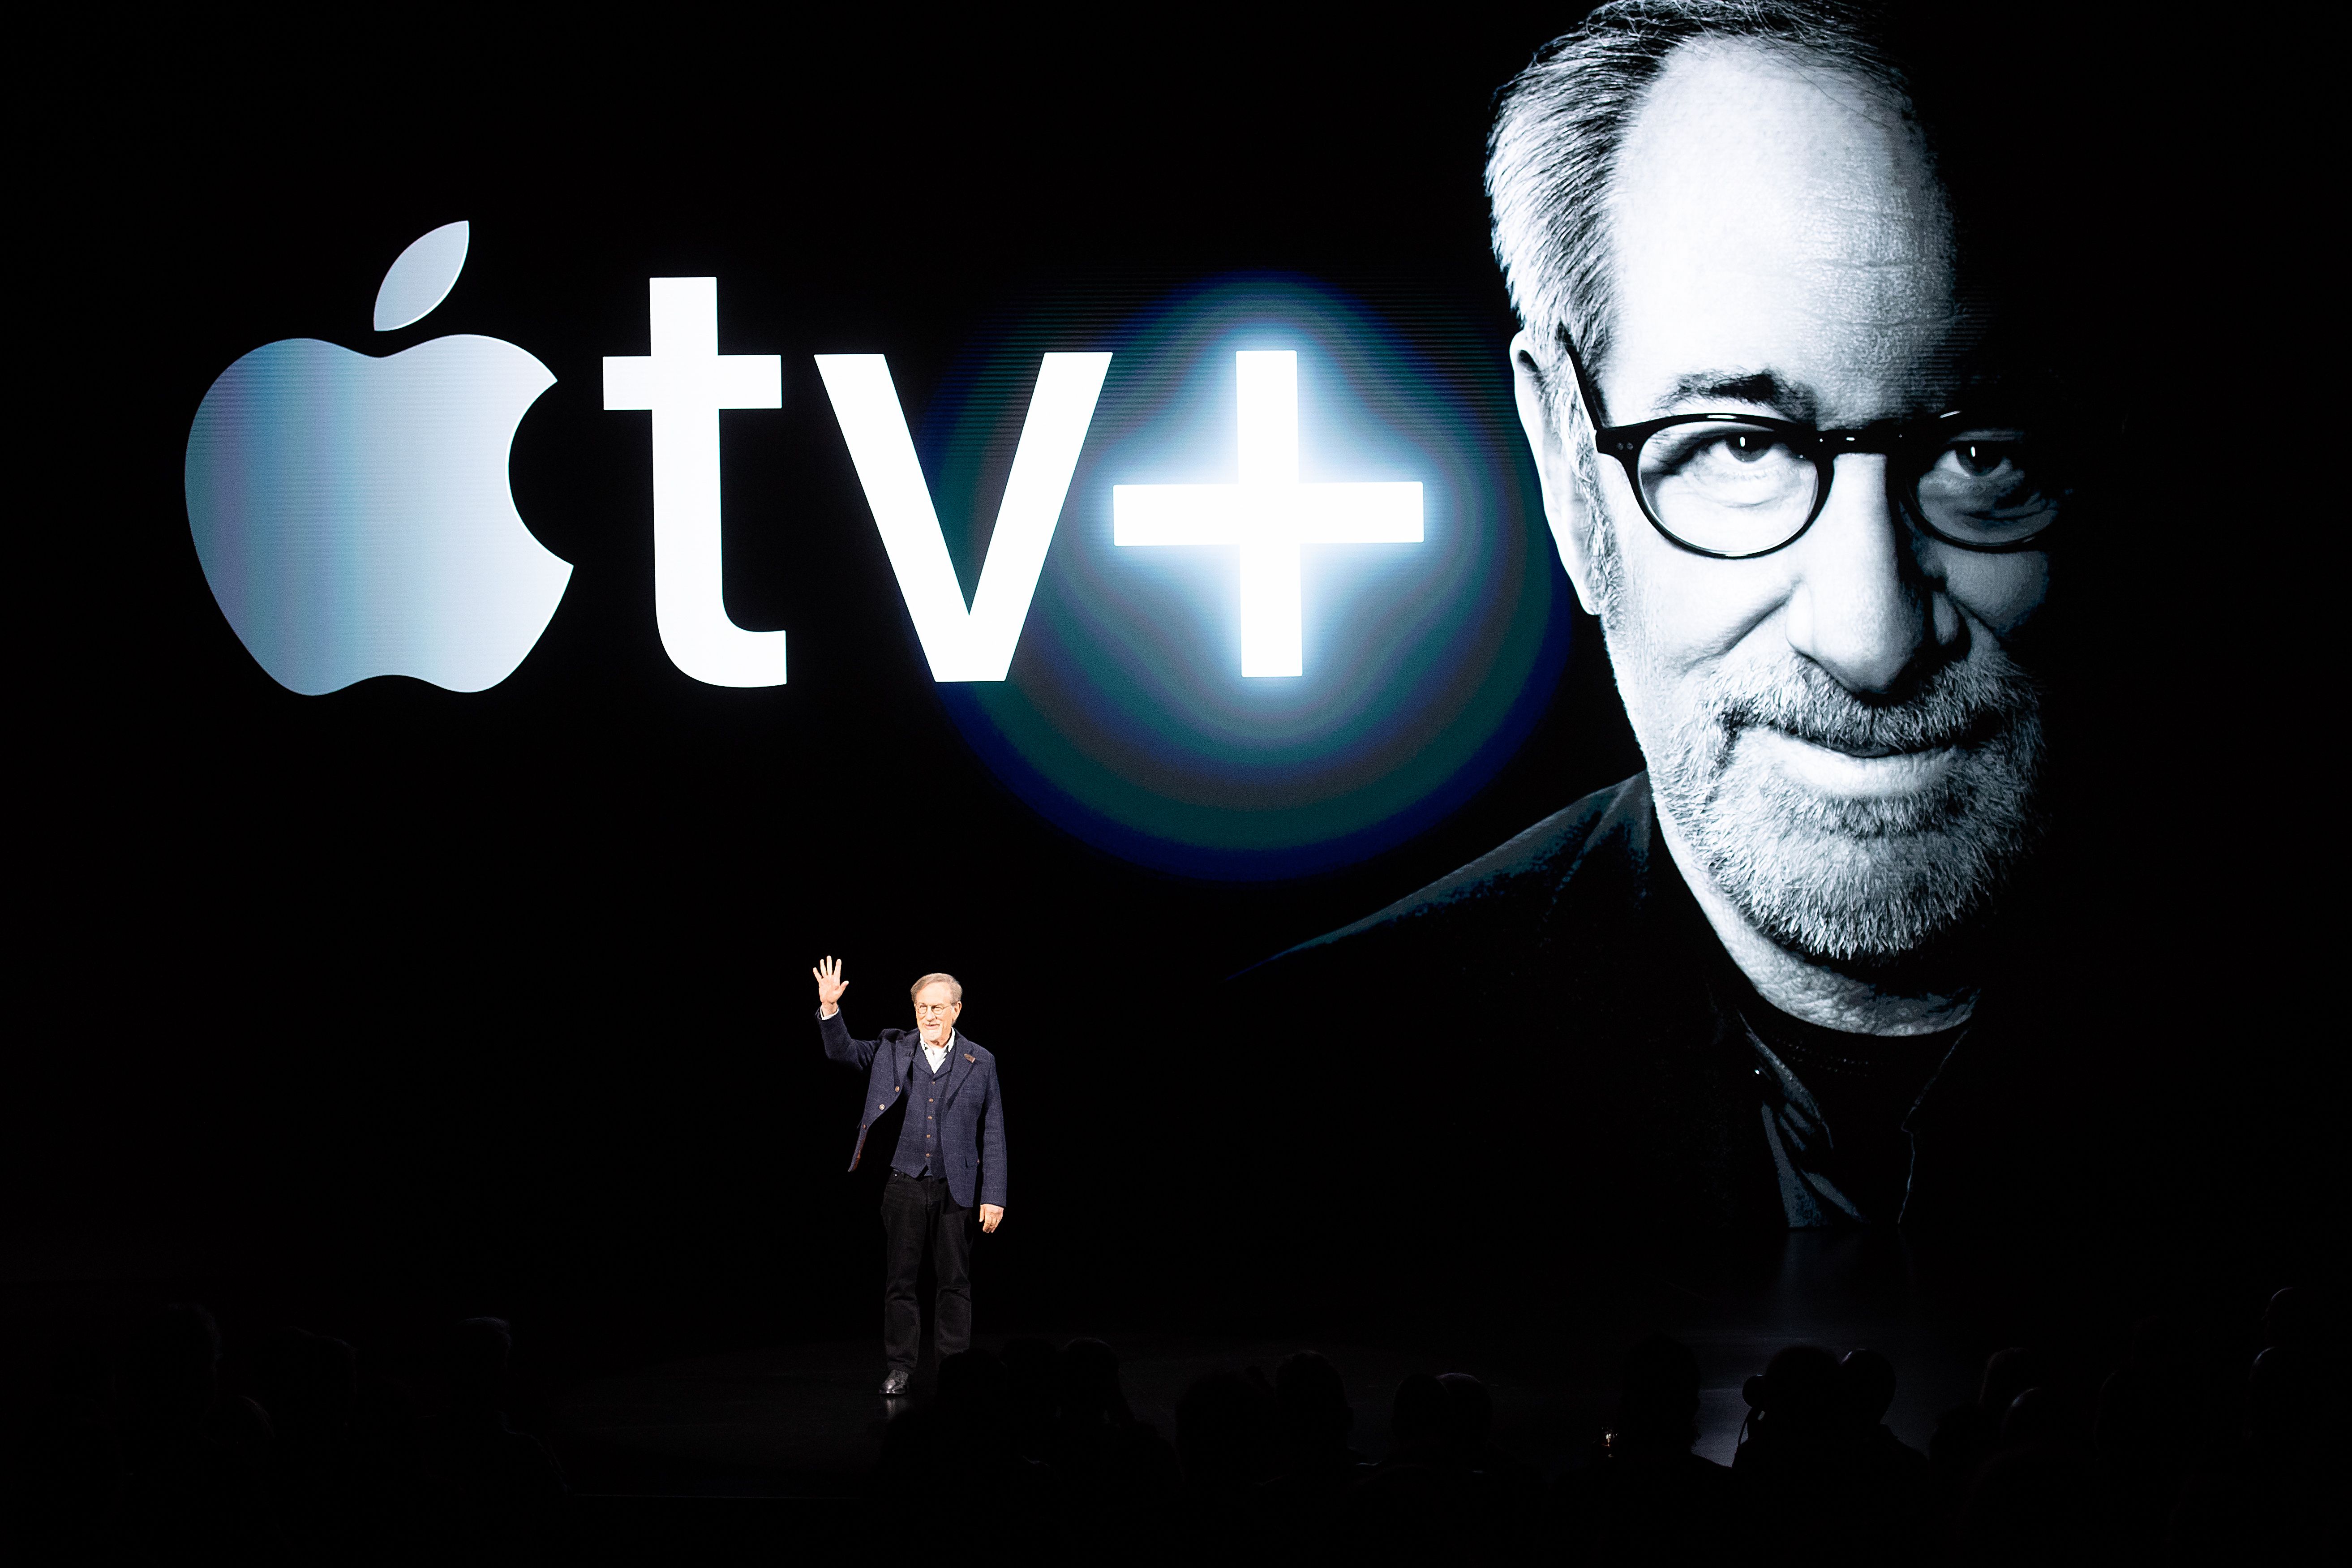 Director Steven Spielberg speaks during an event launching Apple tv+.